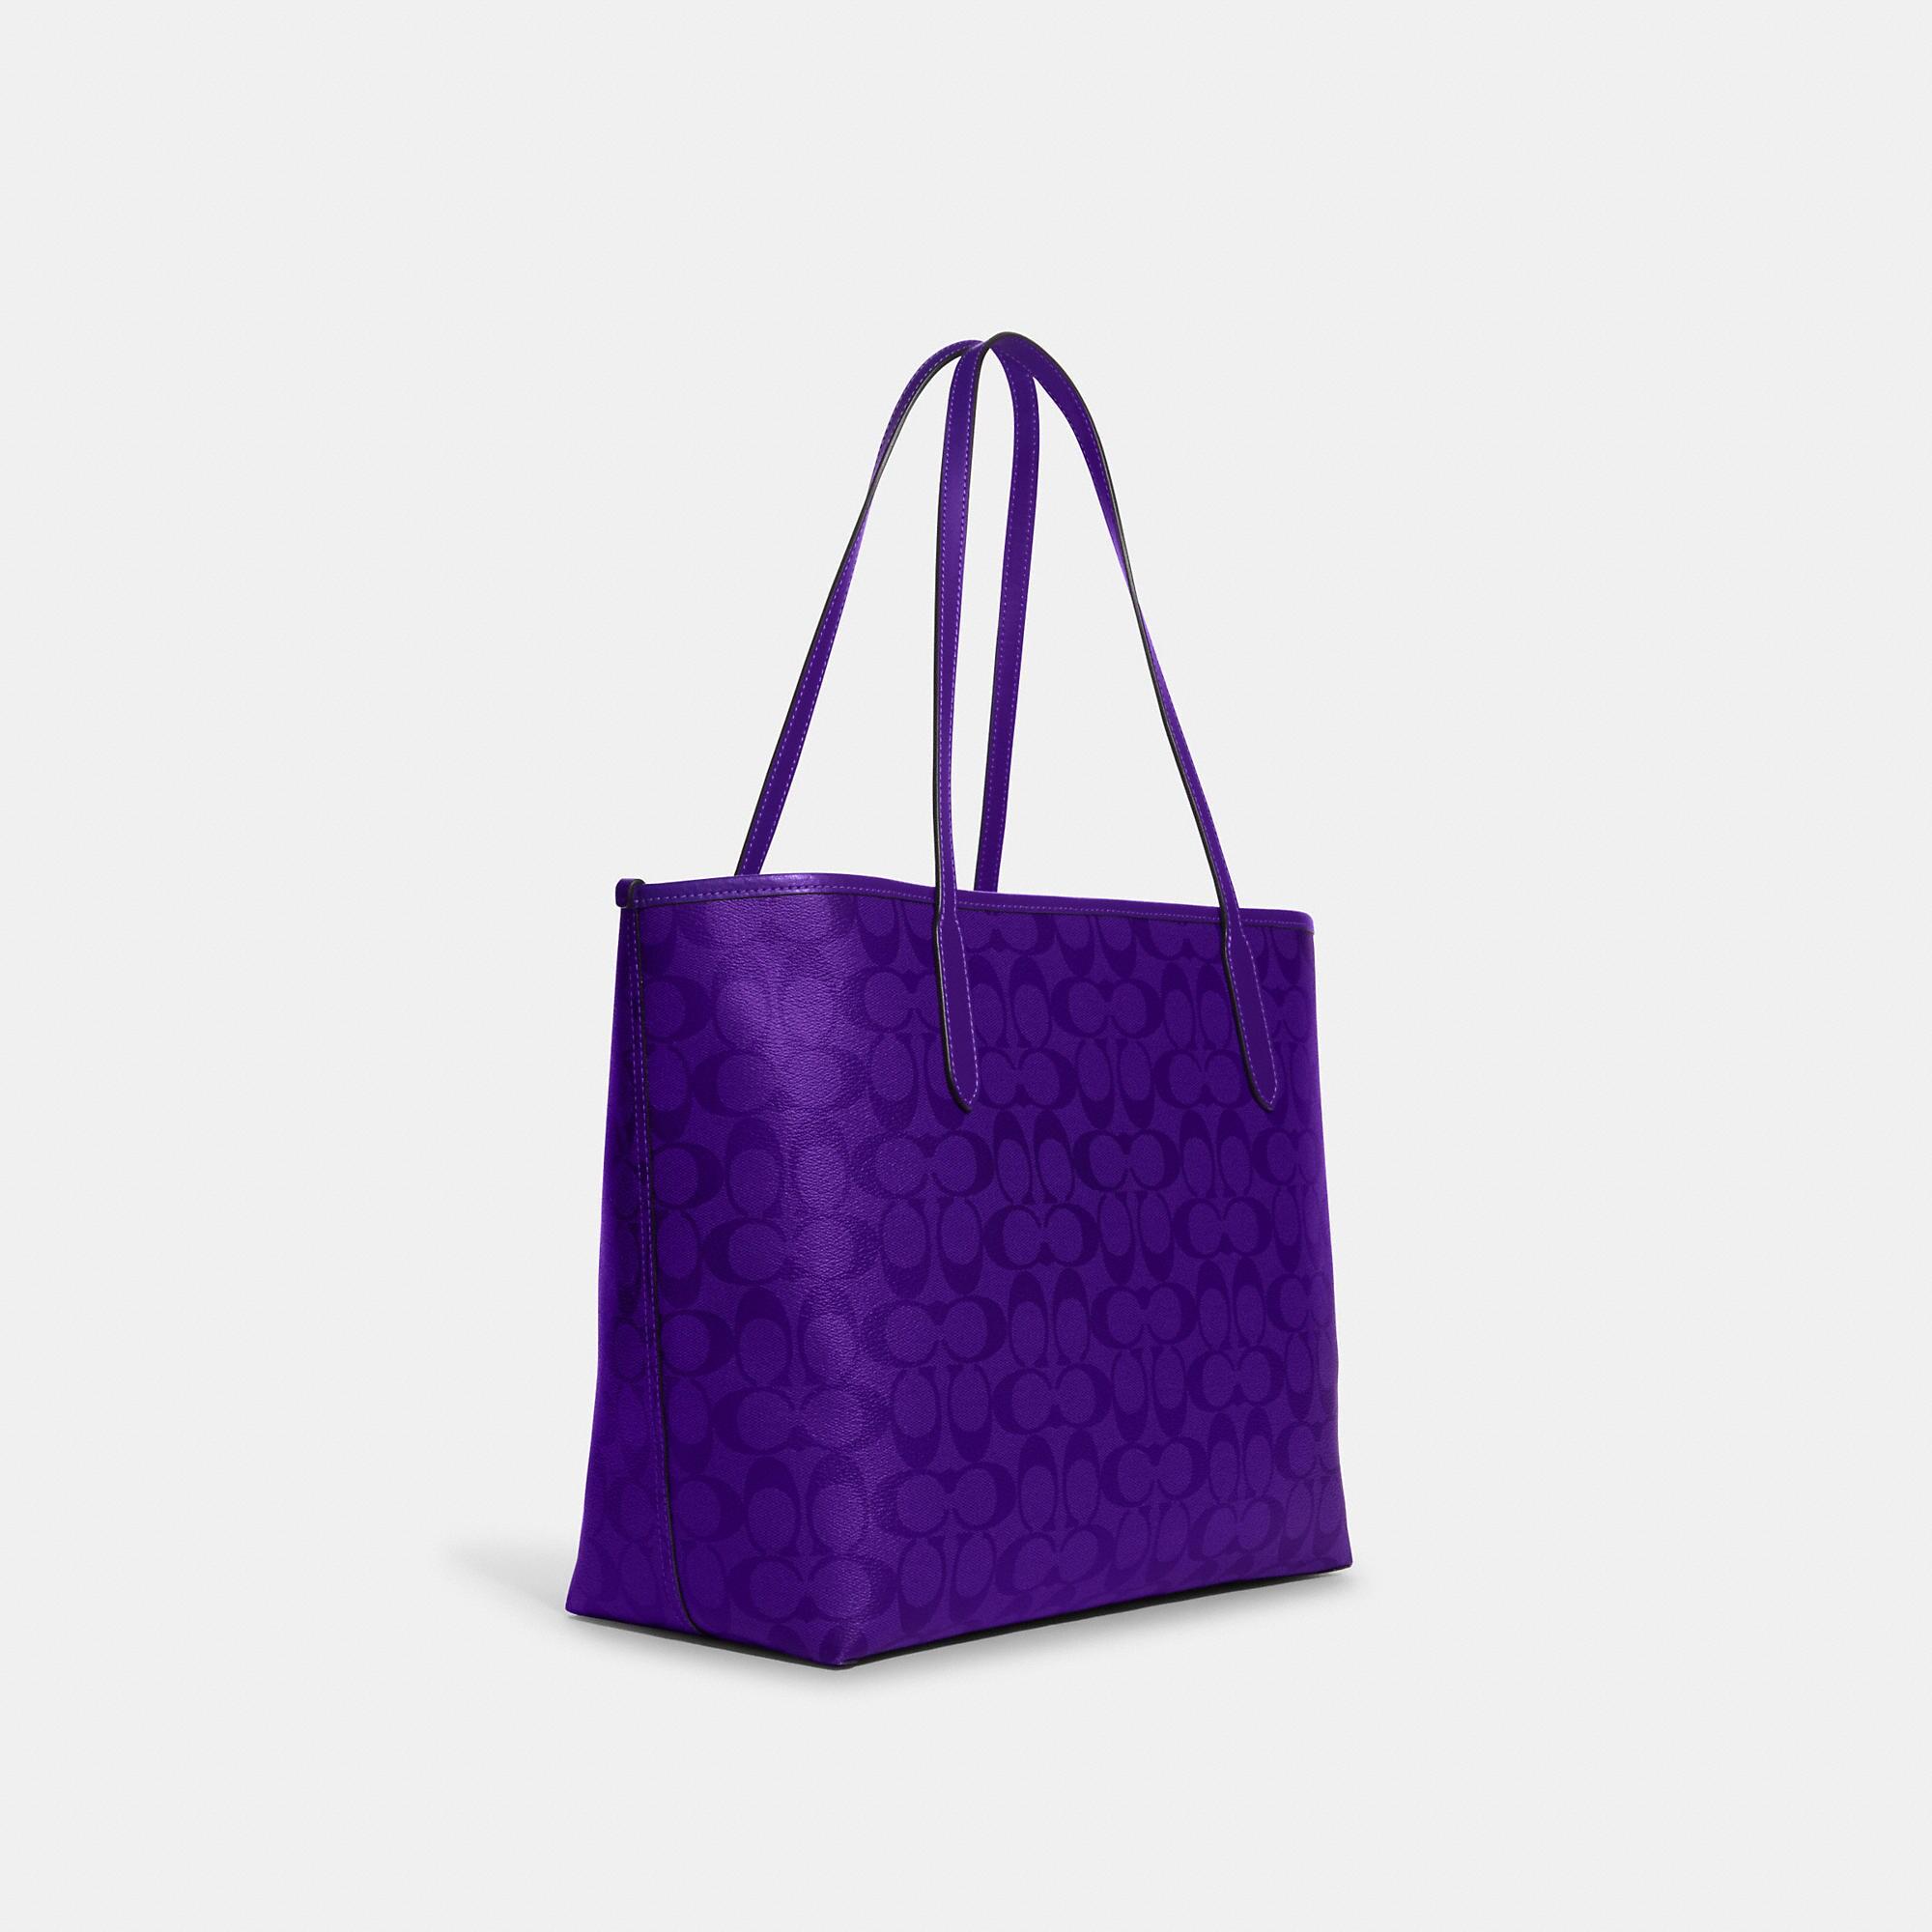 Coach Bag Malaysia | Coach Penelope Shoulder Bag in Bright Violet (CO952)